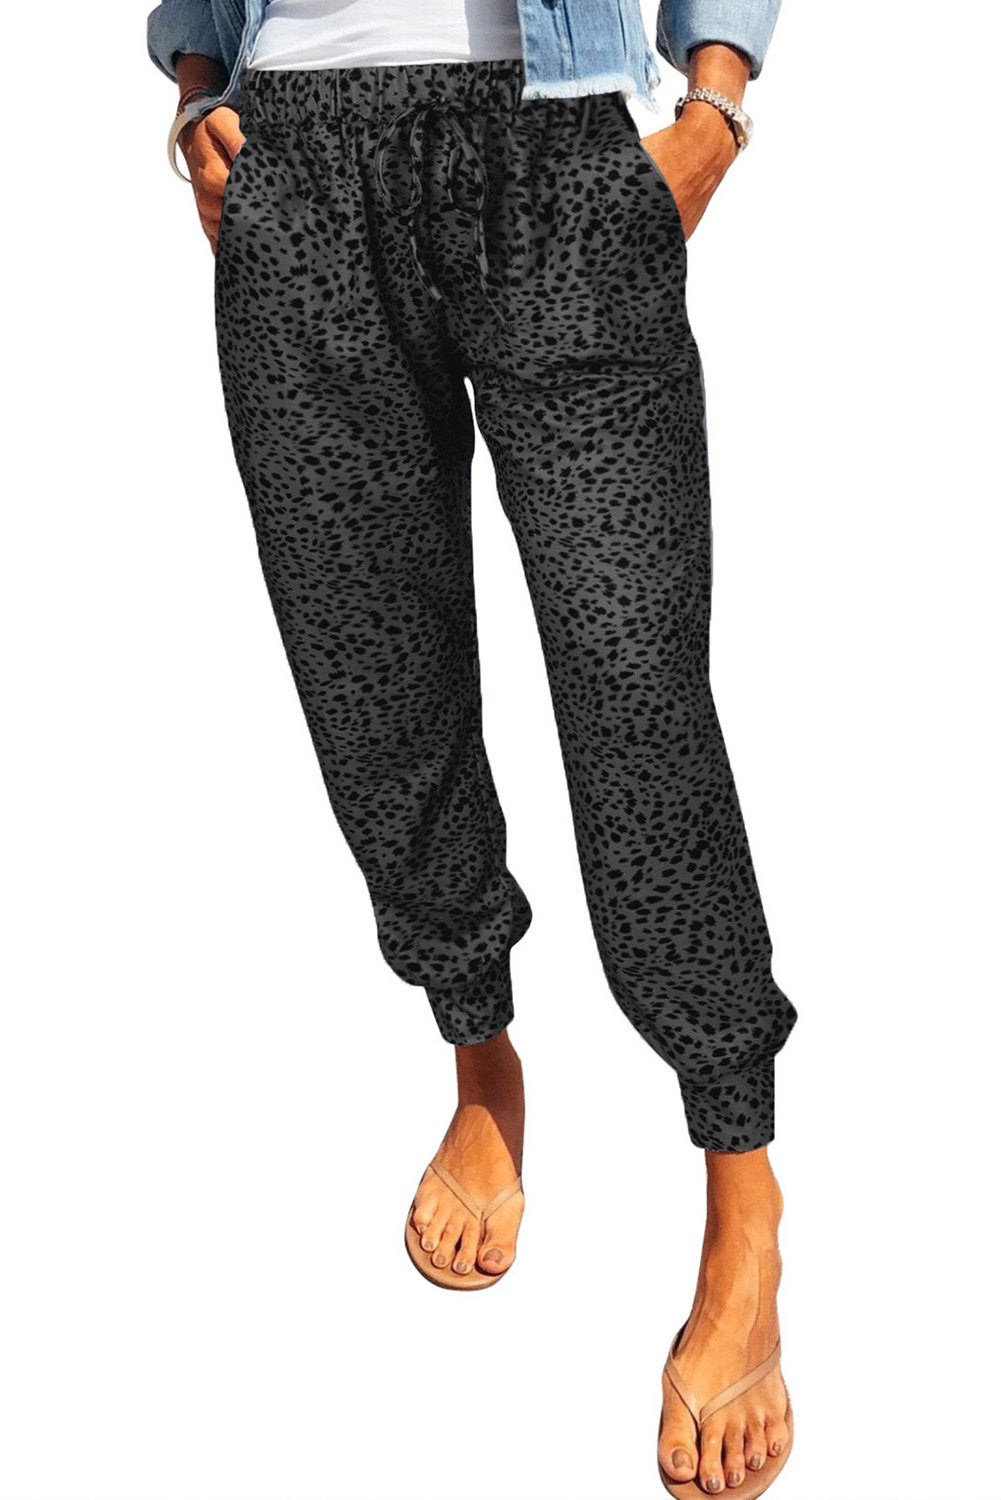 Leopard Print Joggers with Pockets - Bottoms - Pants - 11 - 2024